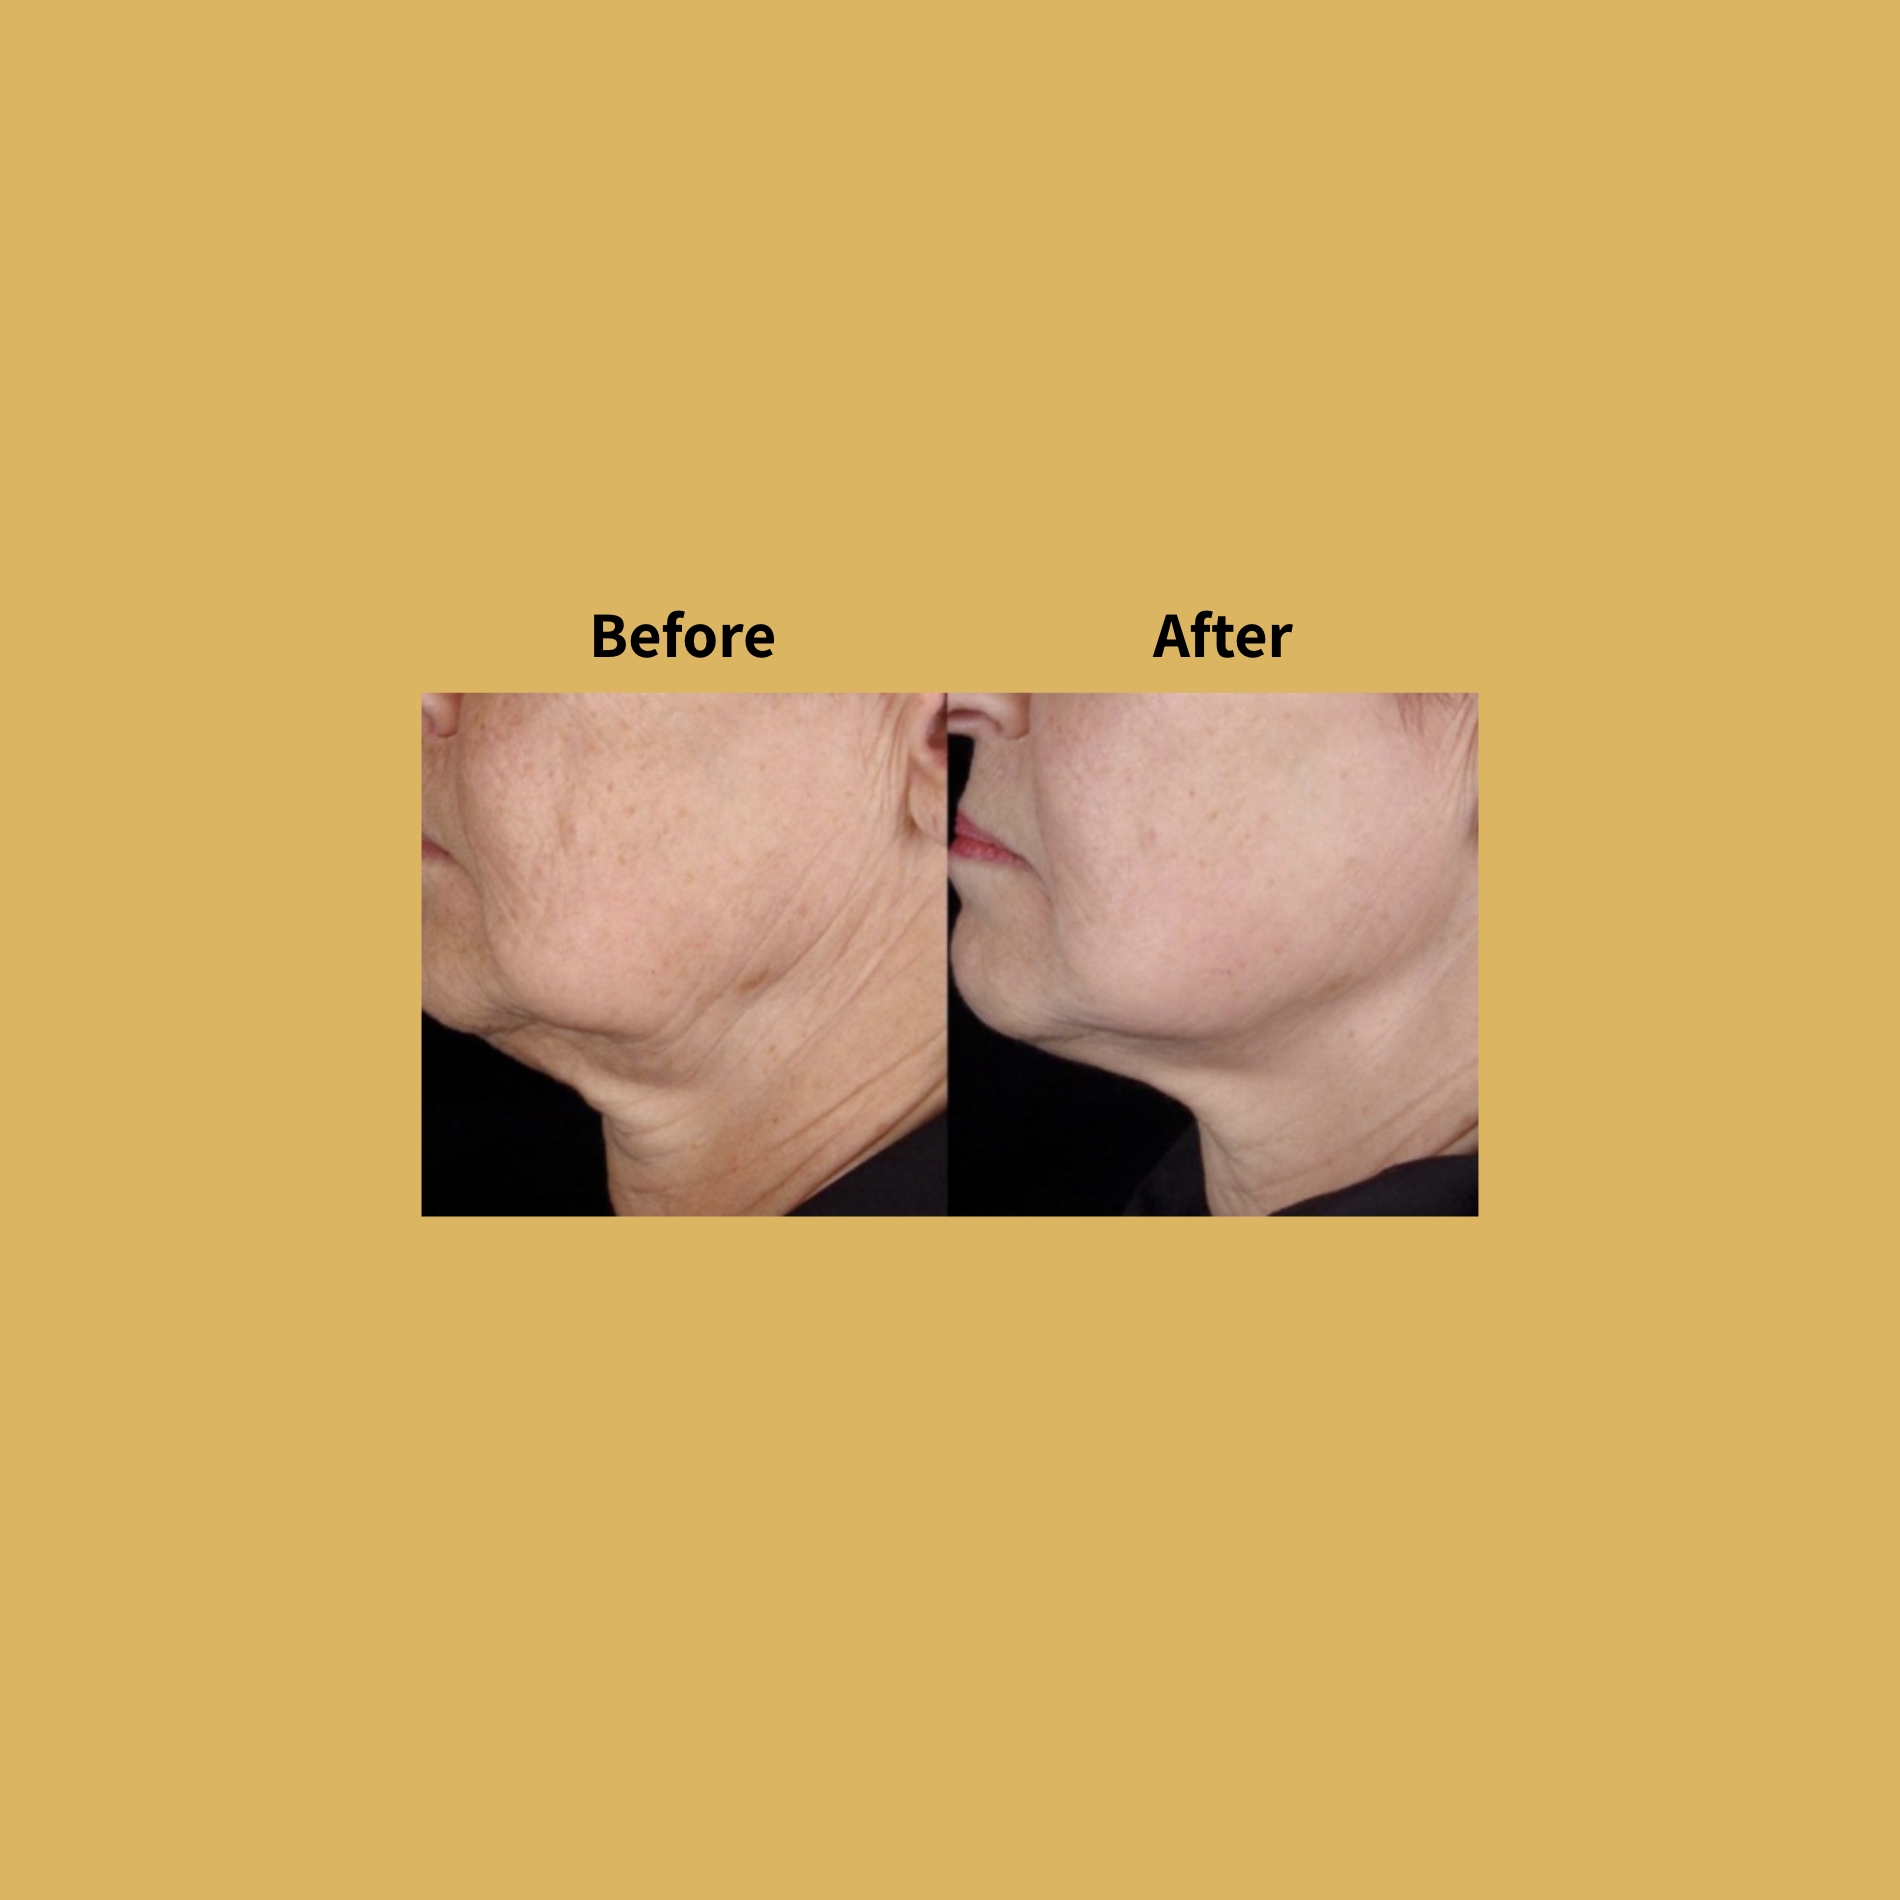 Titan Non-Surgical Facelift Treatment Before and After Photos | Soleil Medical & Beauty Spa in Portland, OR